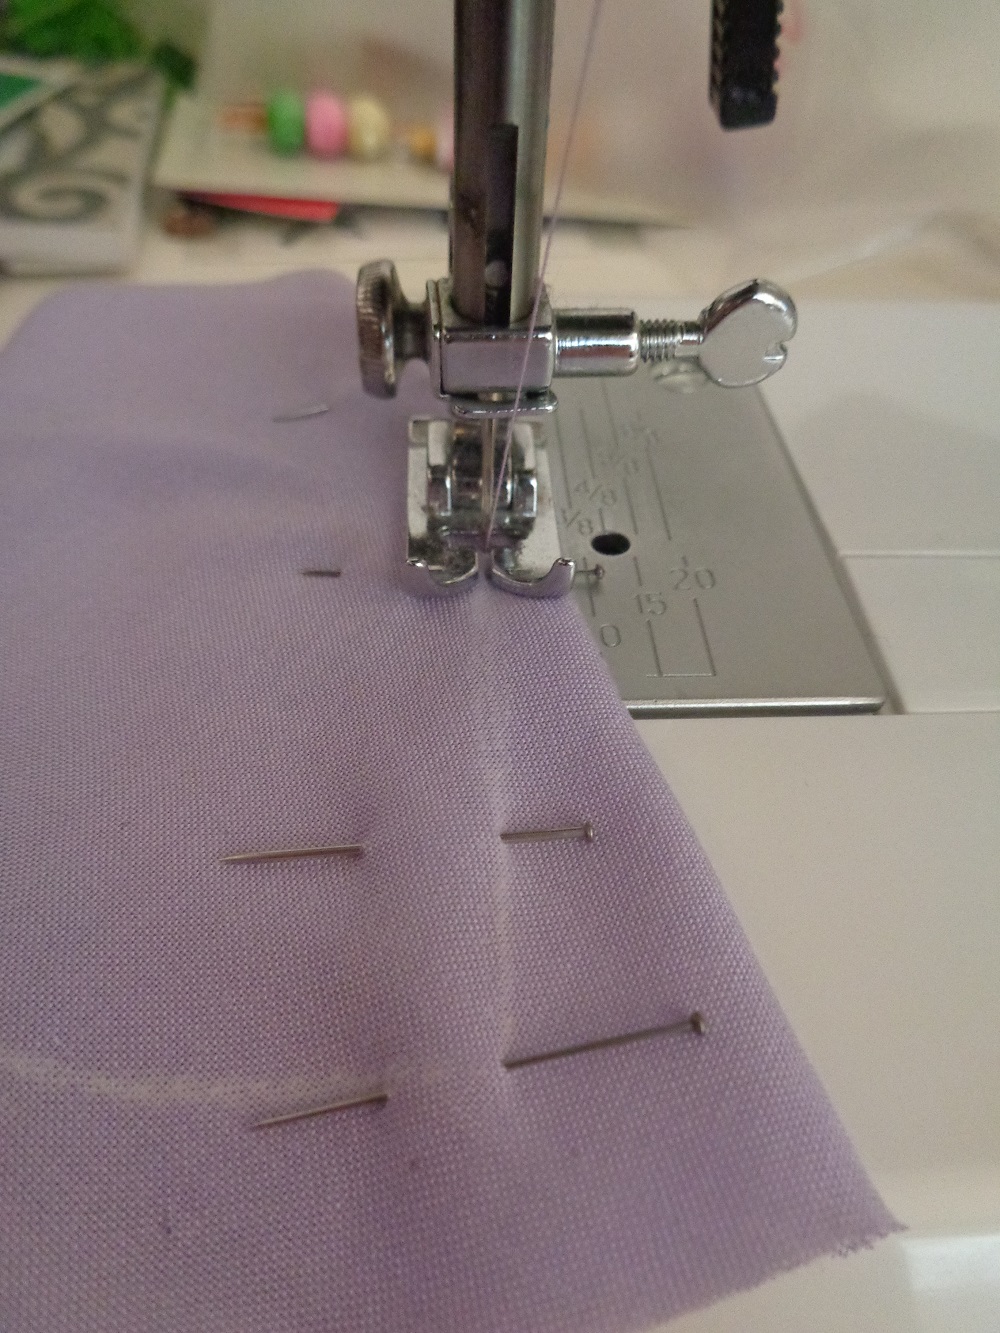 Sewing the dart